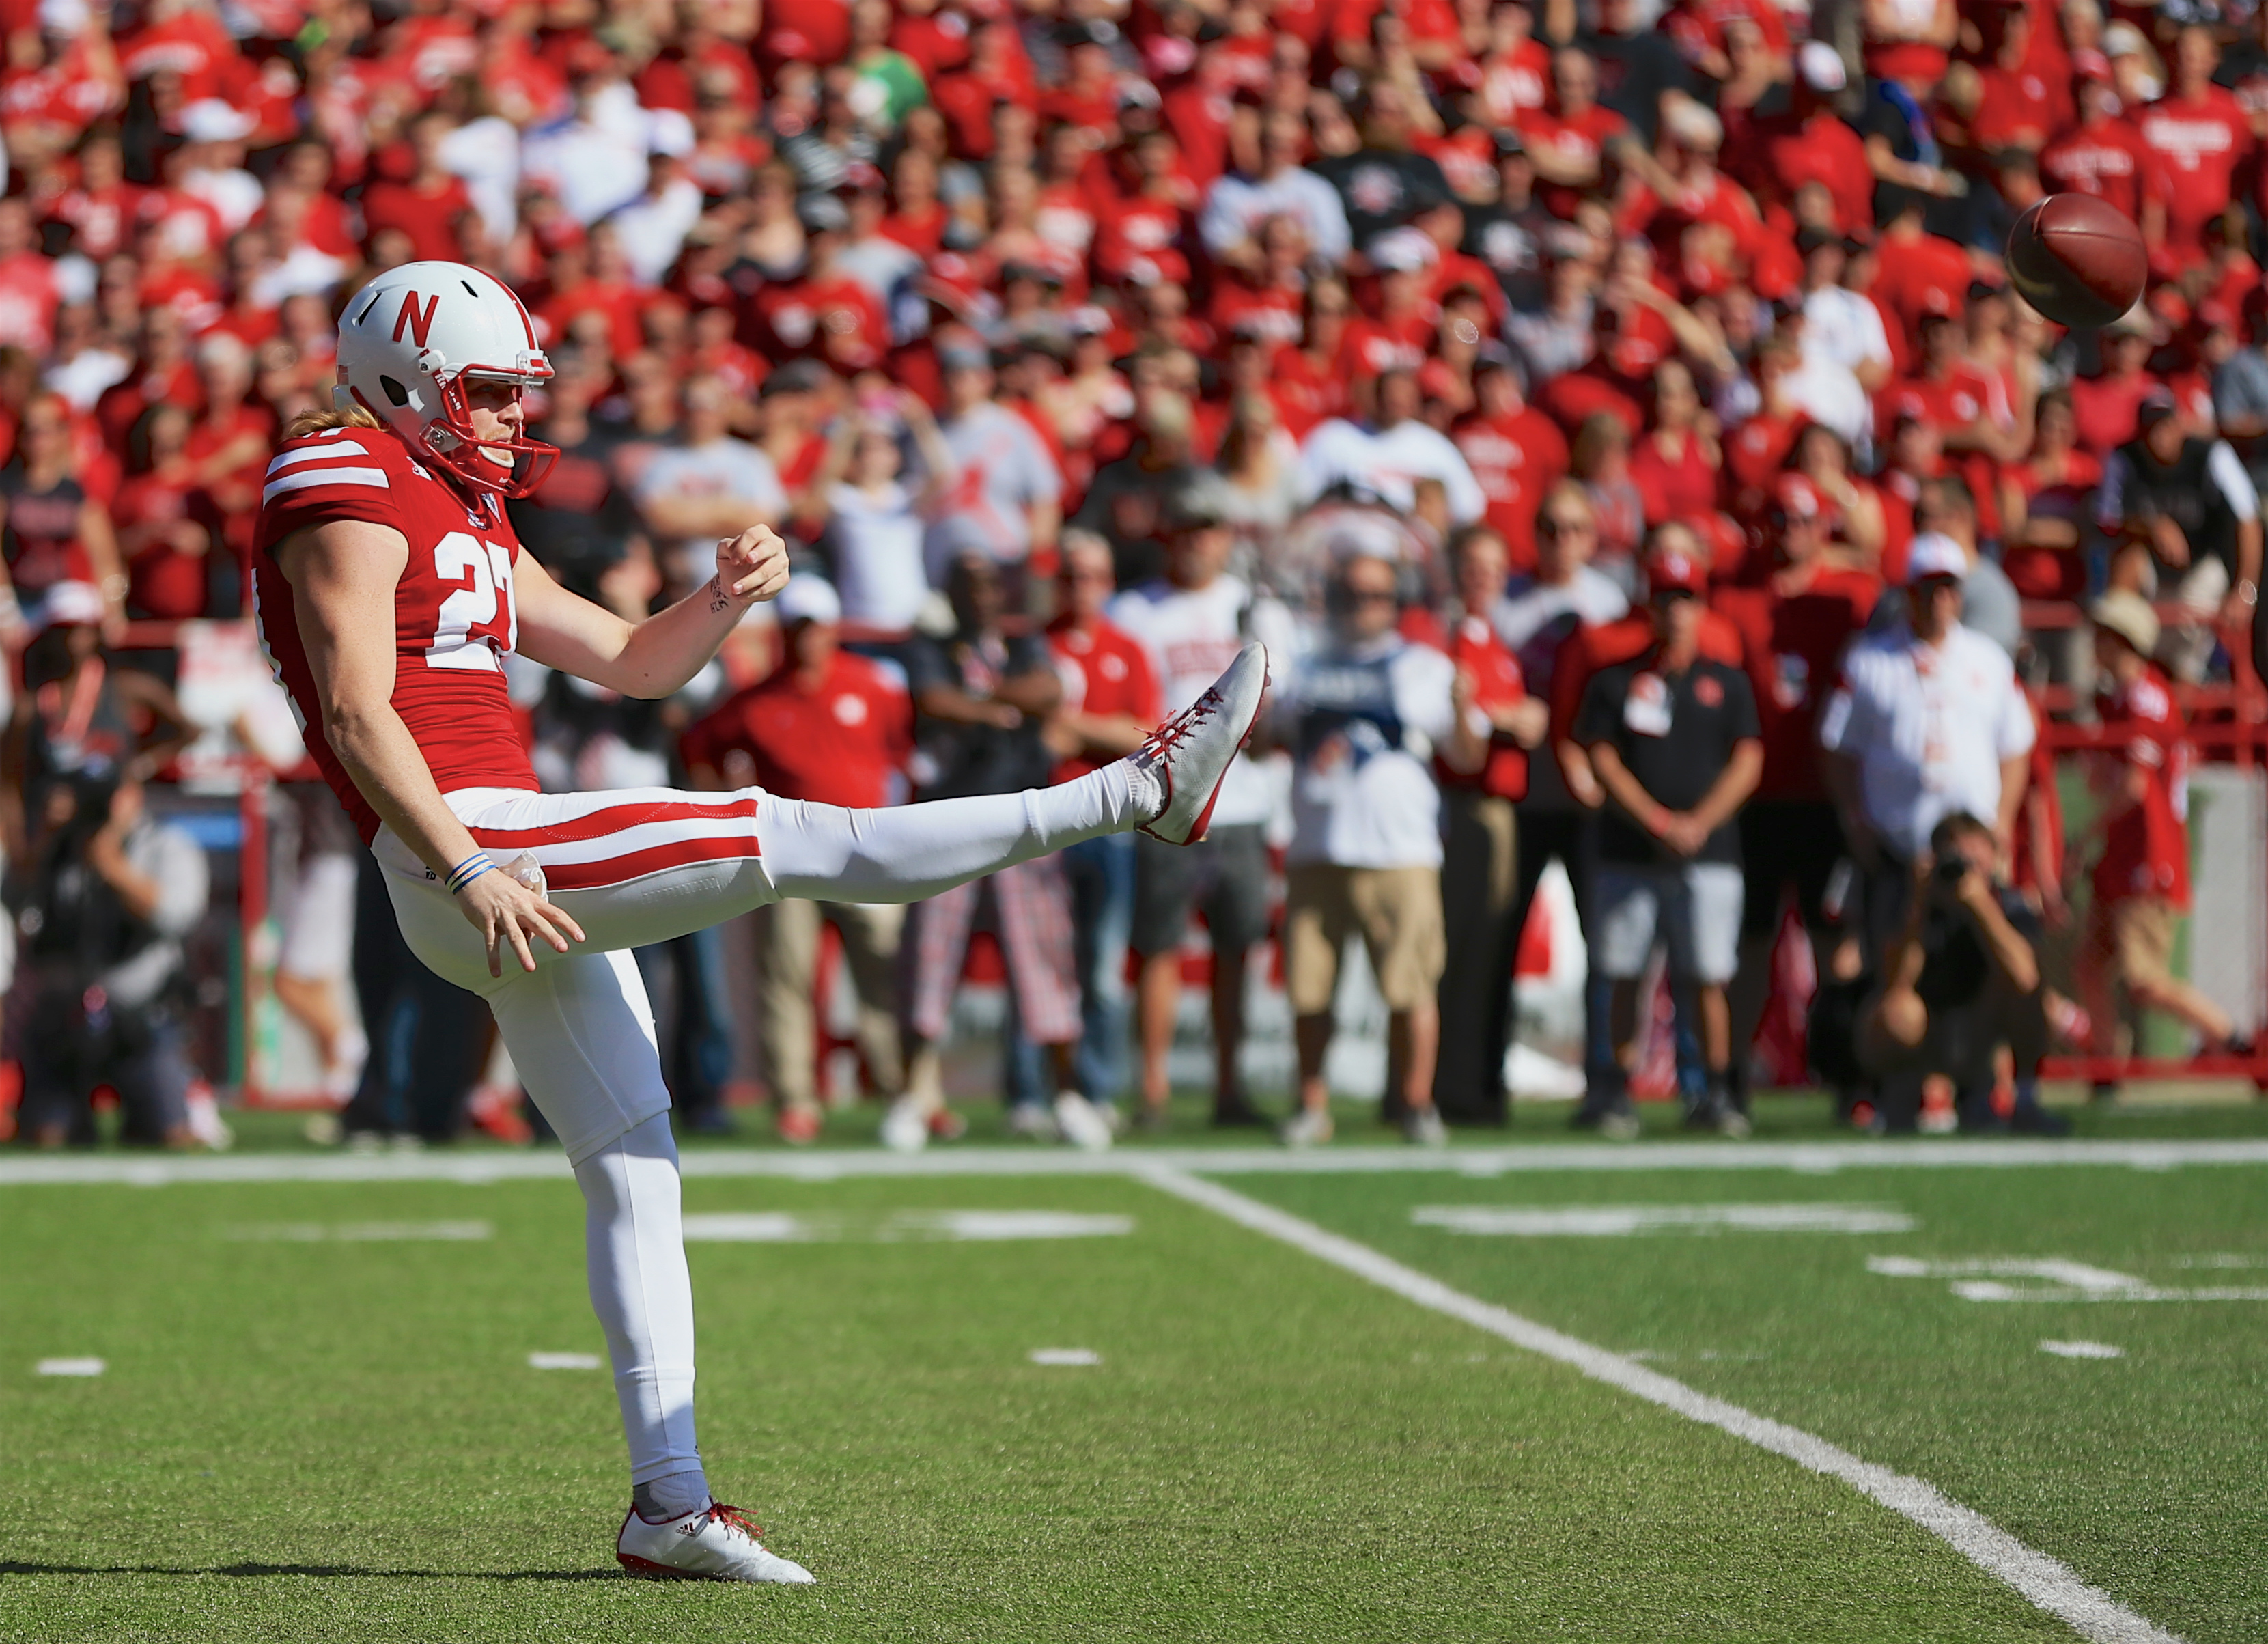 Nebraska punter Sam Foltz punts during a game against Wisconsin in Lincoln, Neb., Oct. 10, 2015. Foltz was killed in a car wreck in Wisconsin on Saturday (Nati Harnik—AP)